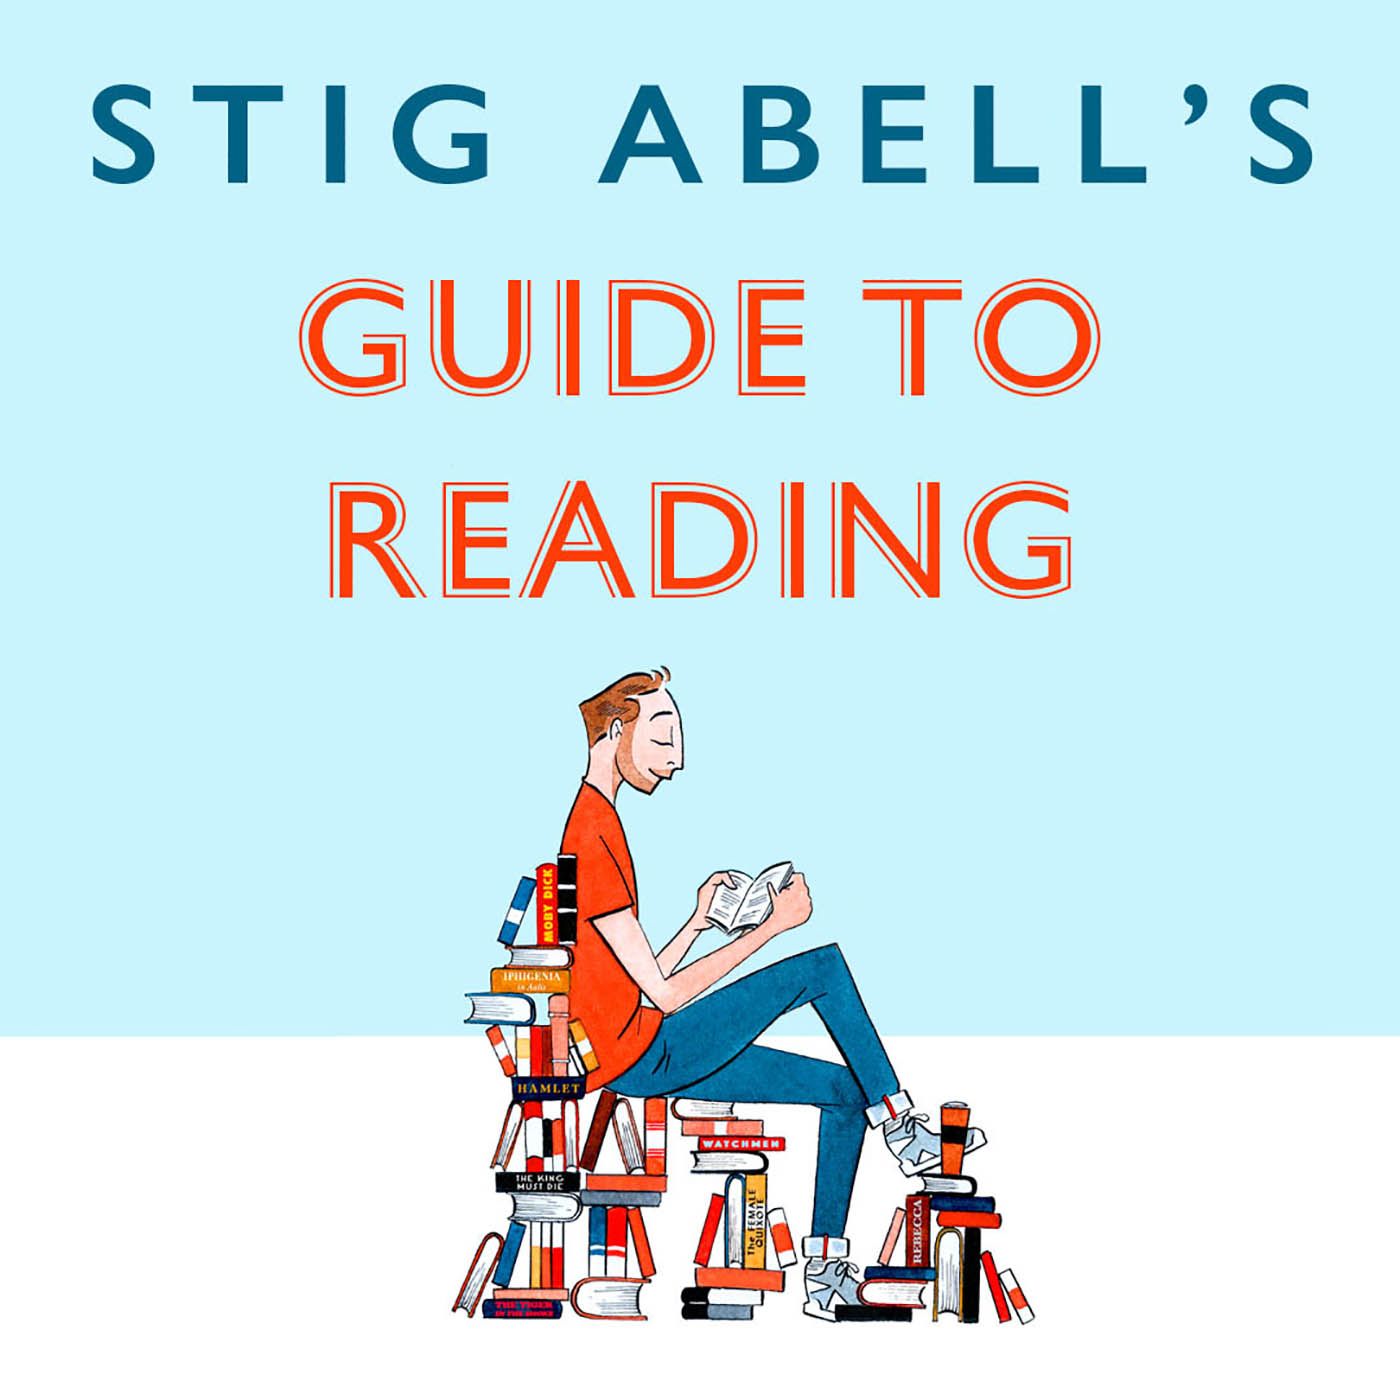 Stig Abell’s Guide to Reading